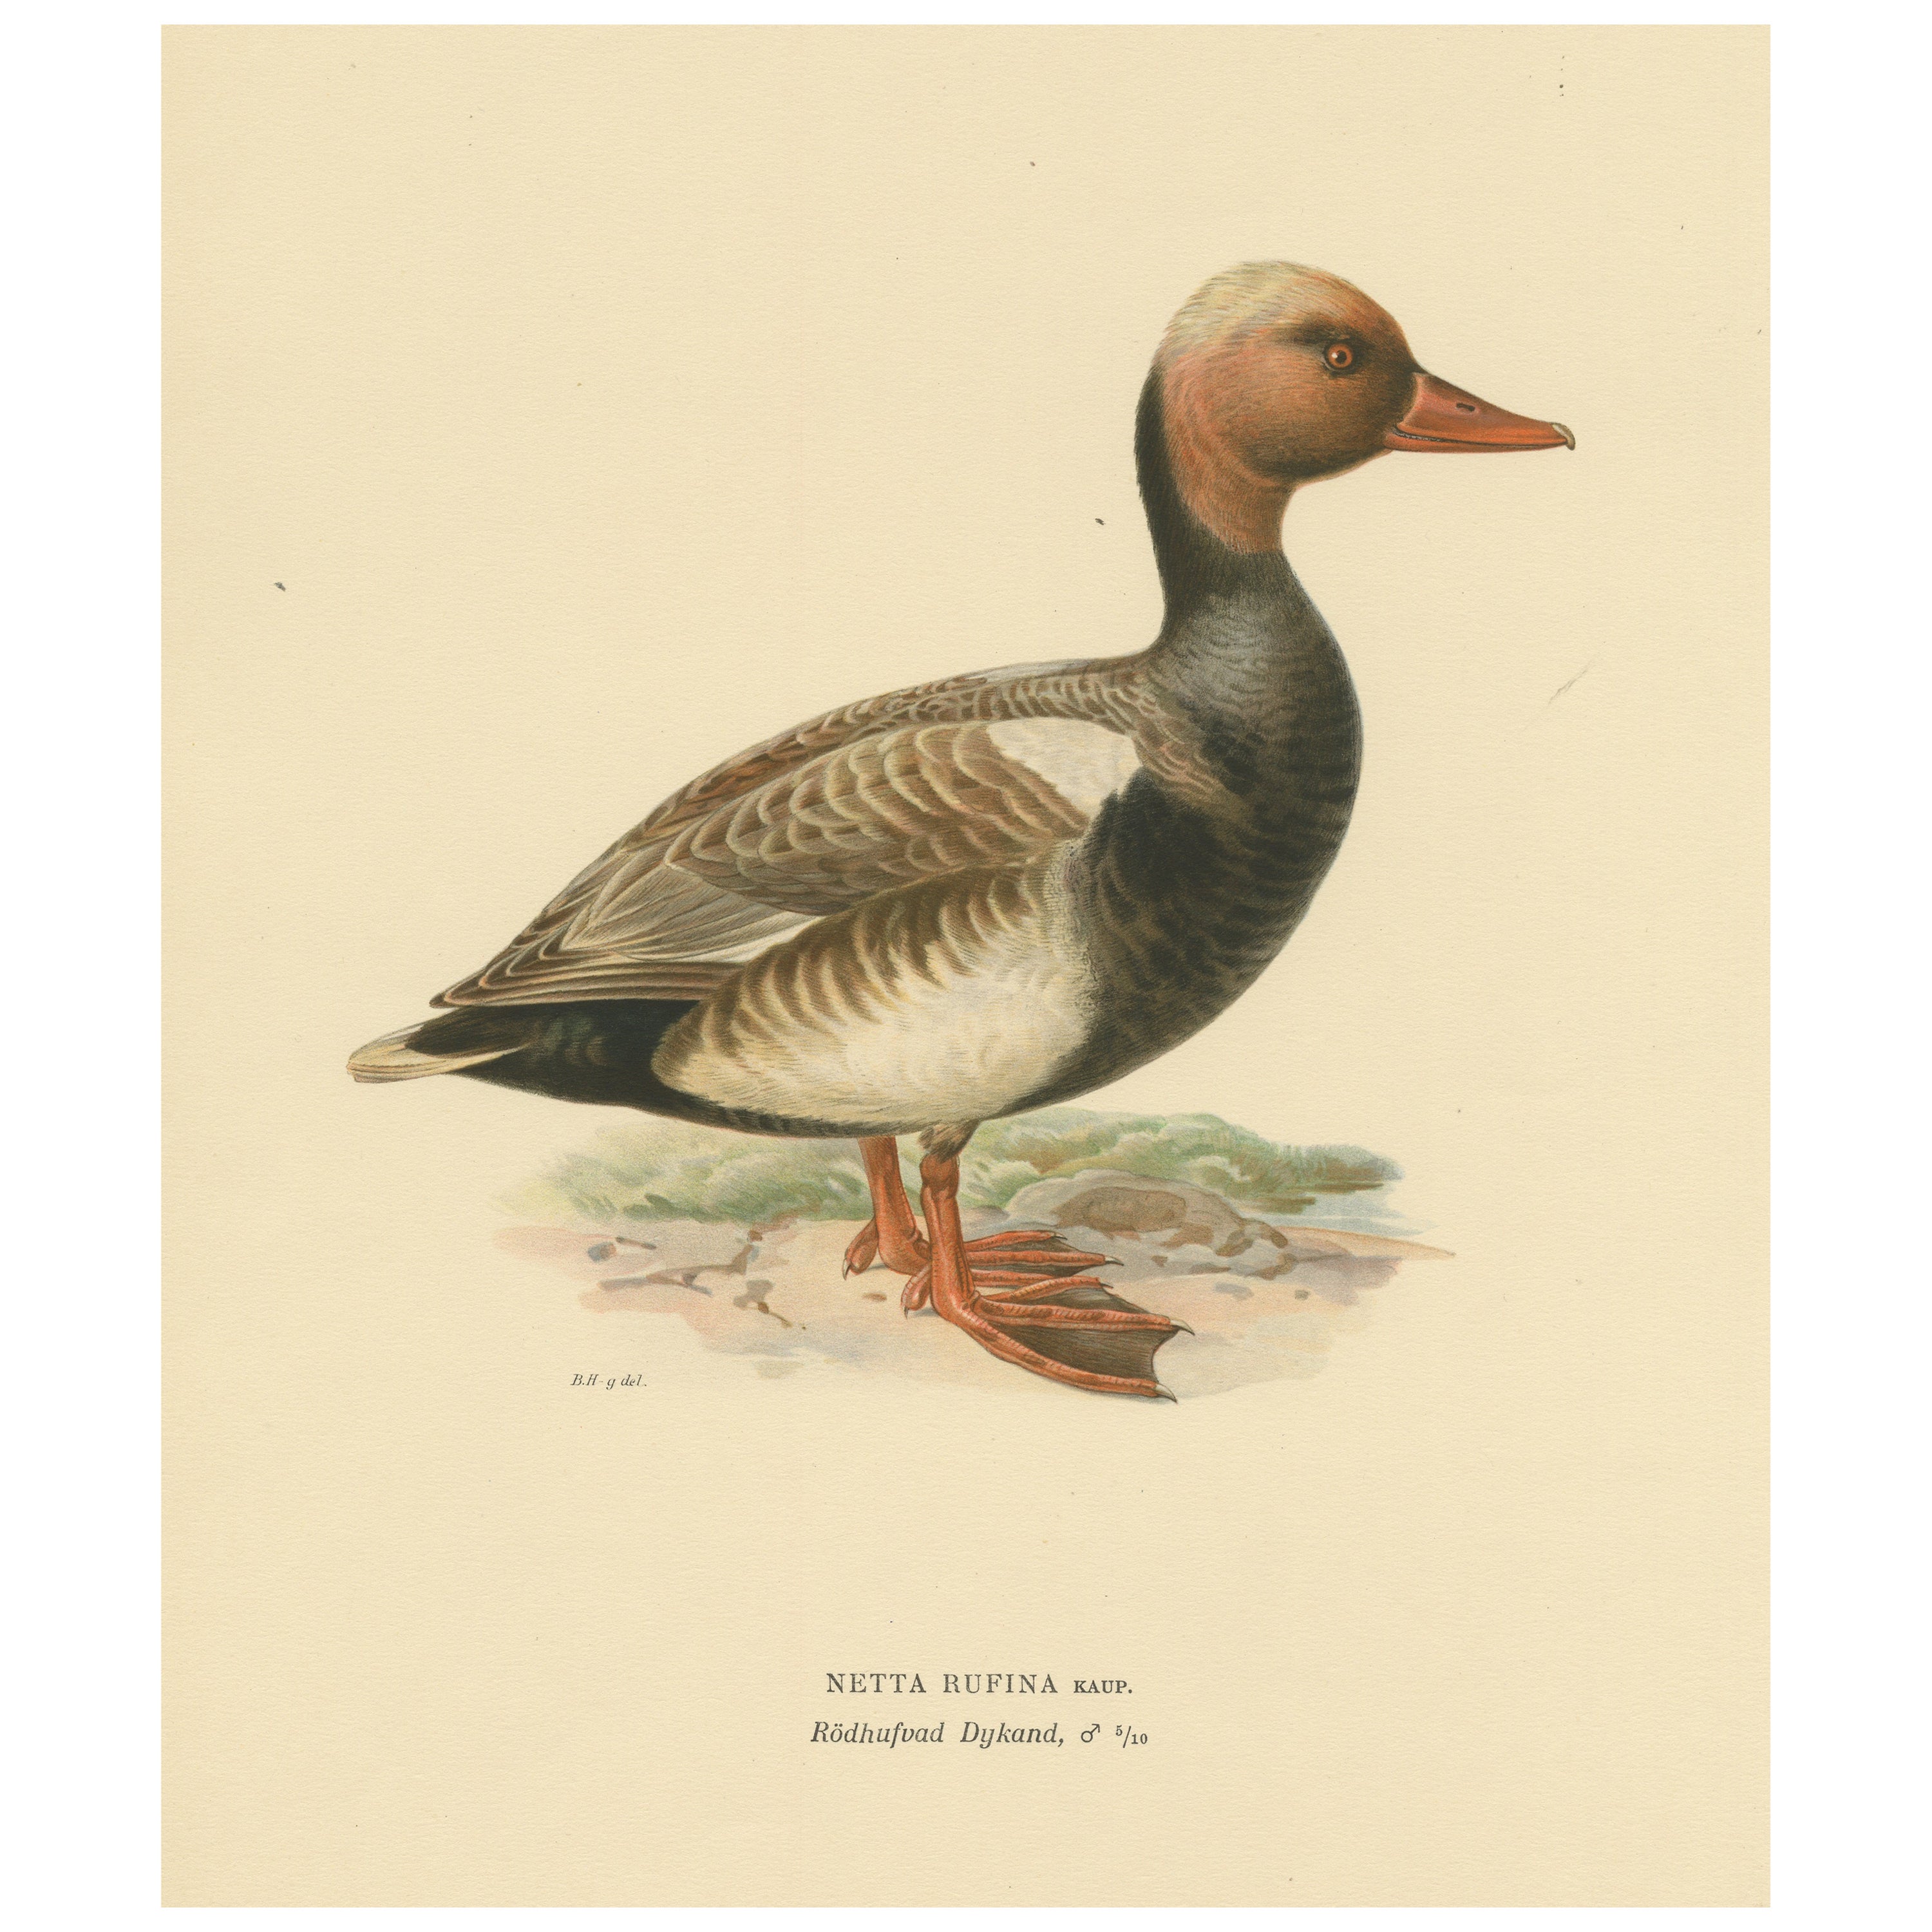 Crimson Crown: Old Bird Print of The Red-Crested Pochard by Magnus von Wright For Sale